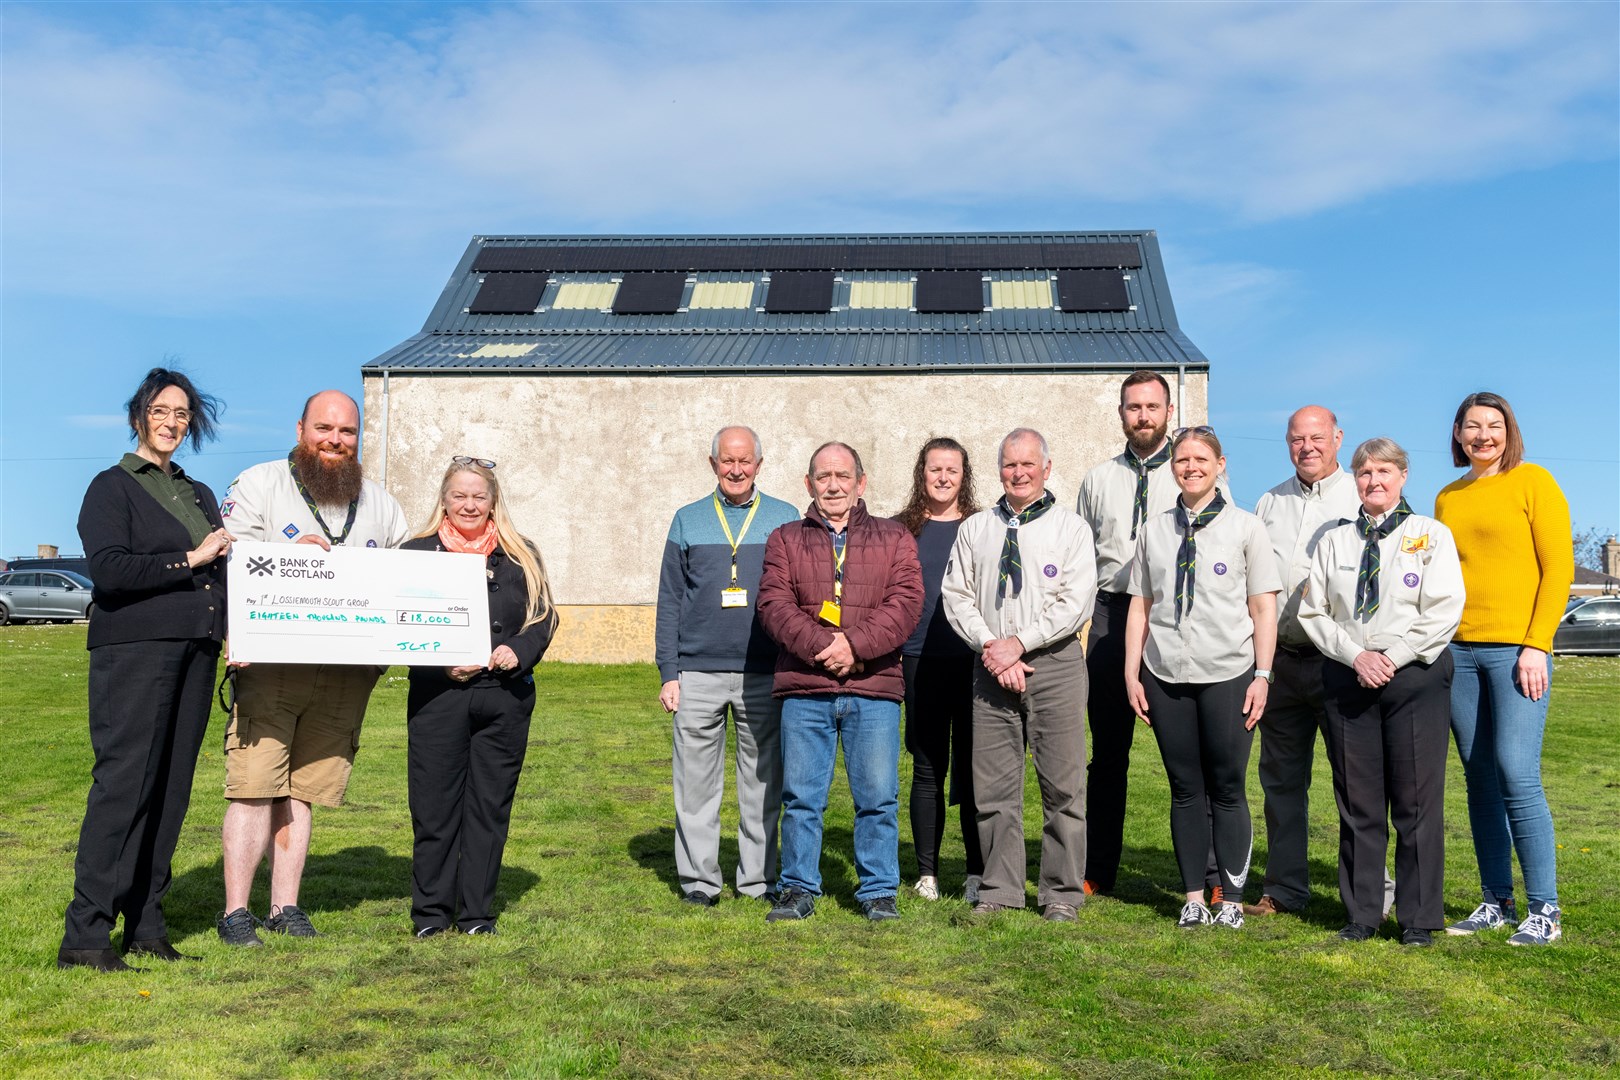 1st Lossiemouth Scout Group have fitted solar panels after receiving a grant of £18,000 from the Just Transition Participatory Budgeting Fund. From left: Ann Mitchell (Money for Moray), Alan Anderson (Scout Master) and Karen Pryce-Iddon (Money for Moray). Picture: Beth Taylor